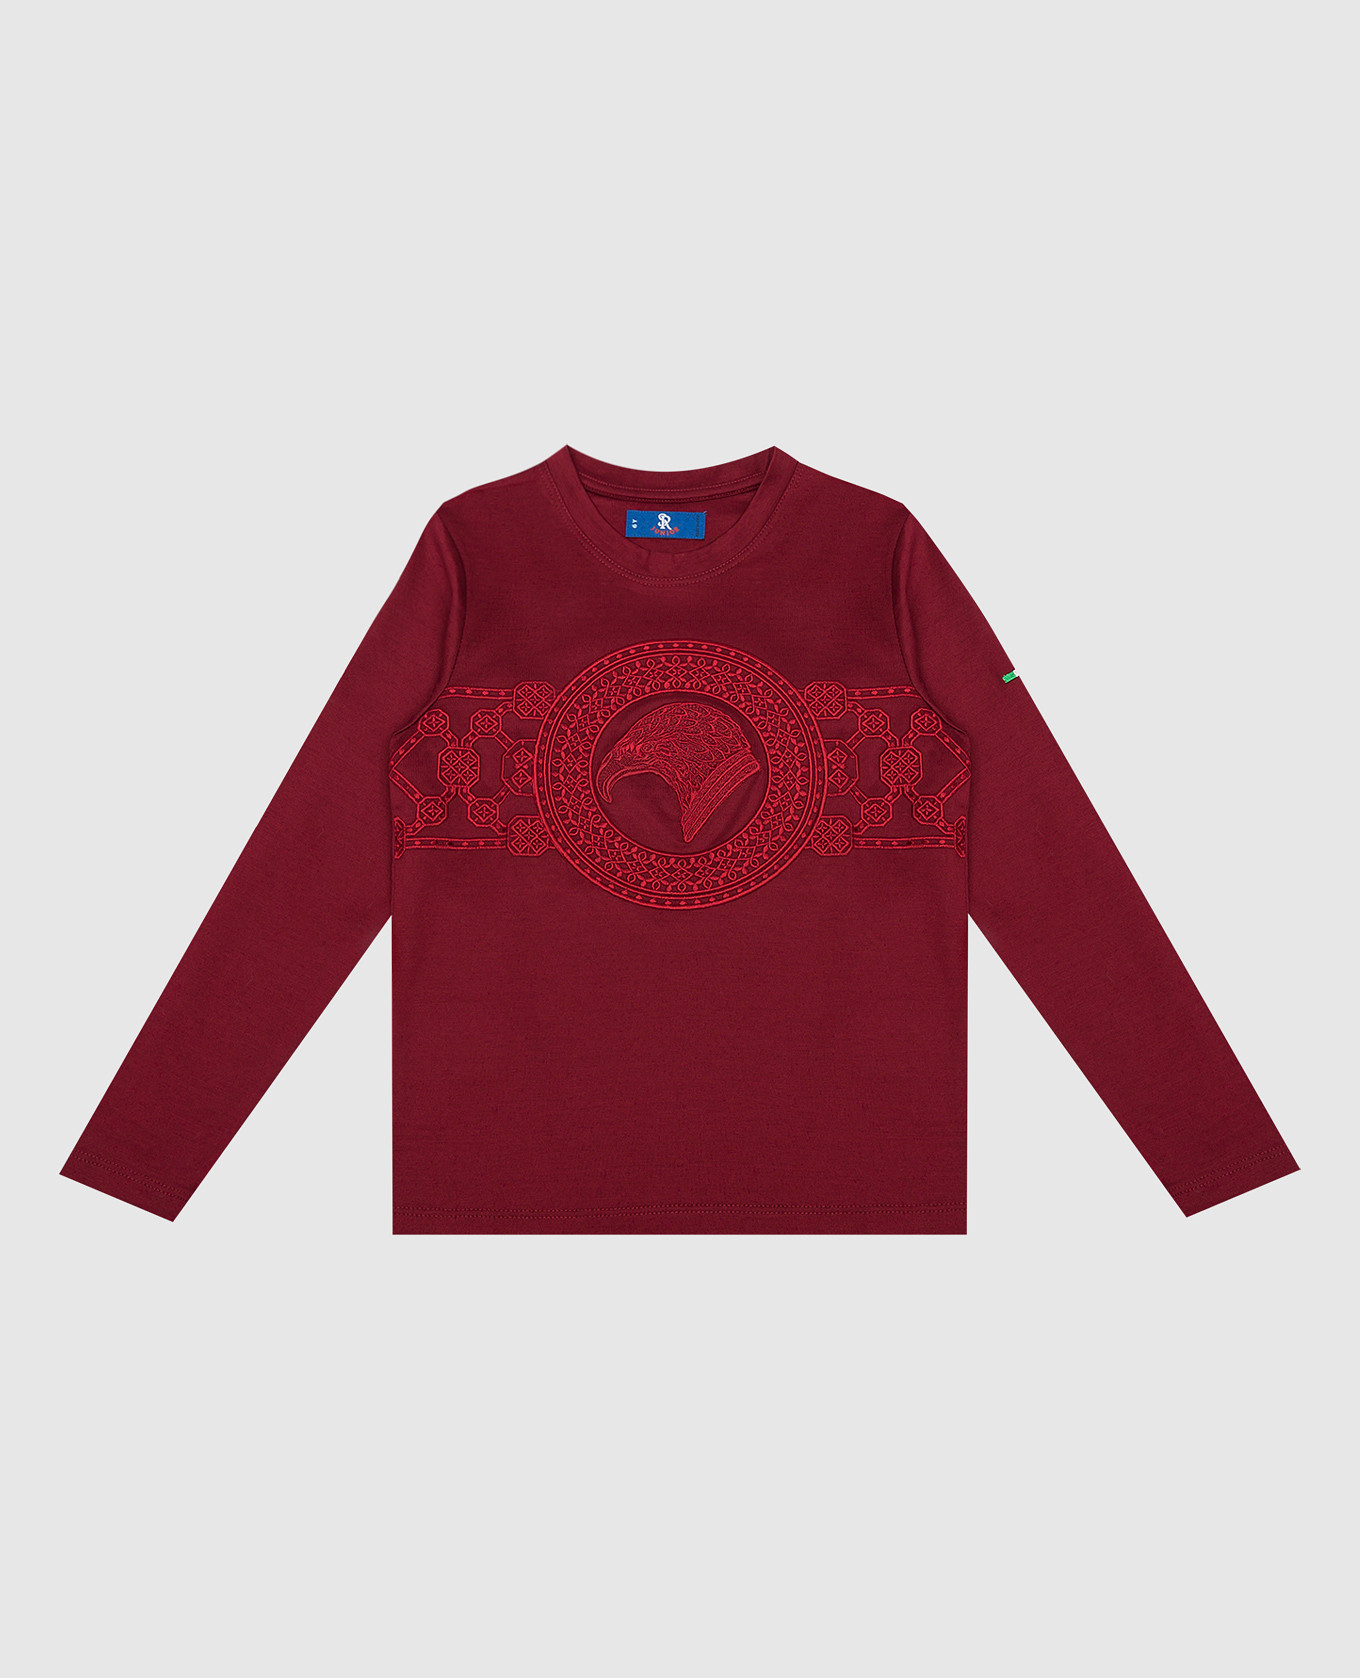 Children's burgundy longsleeve with logo embroidery